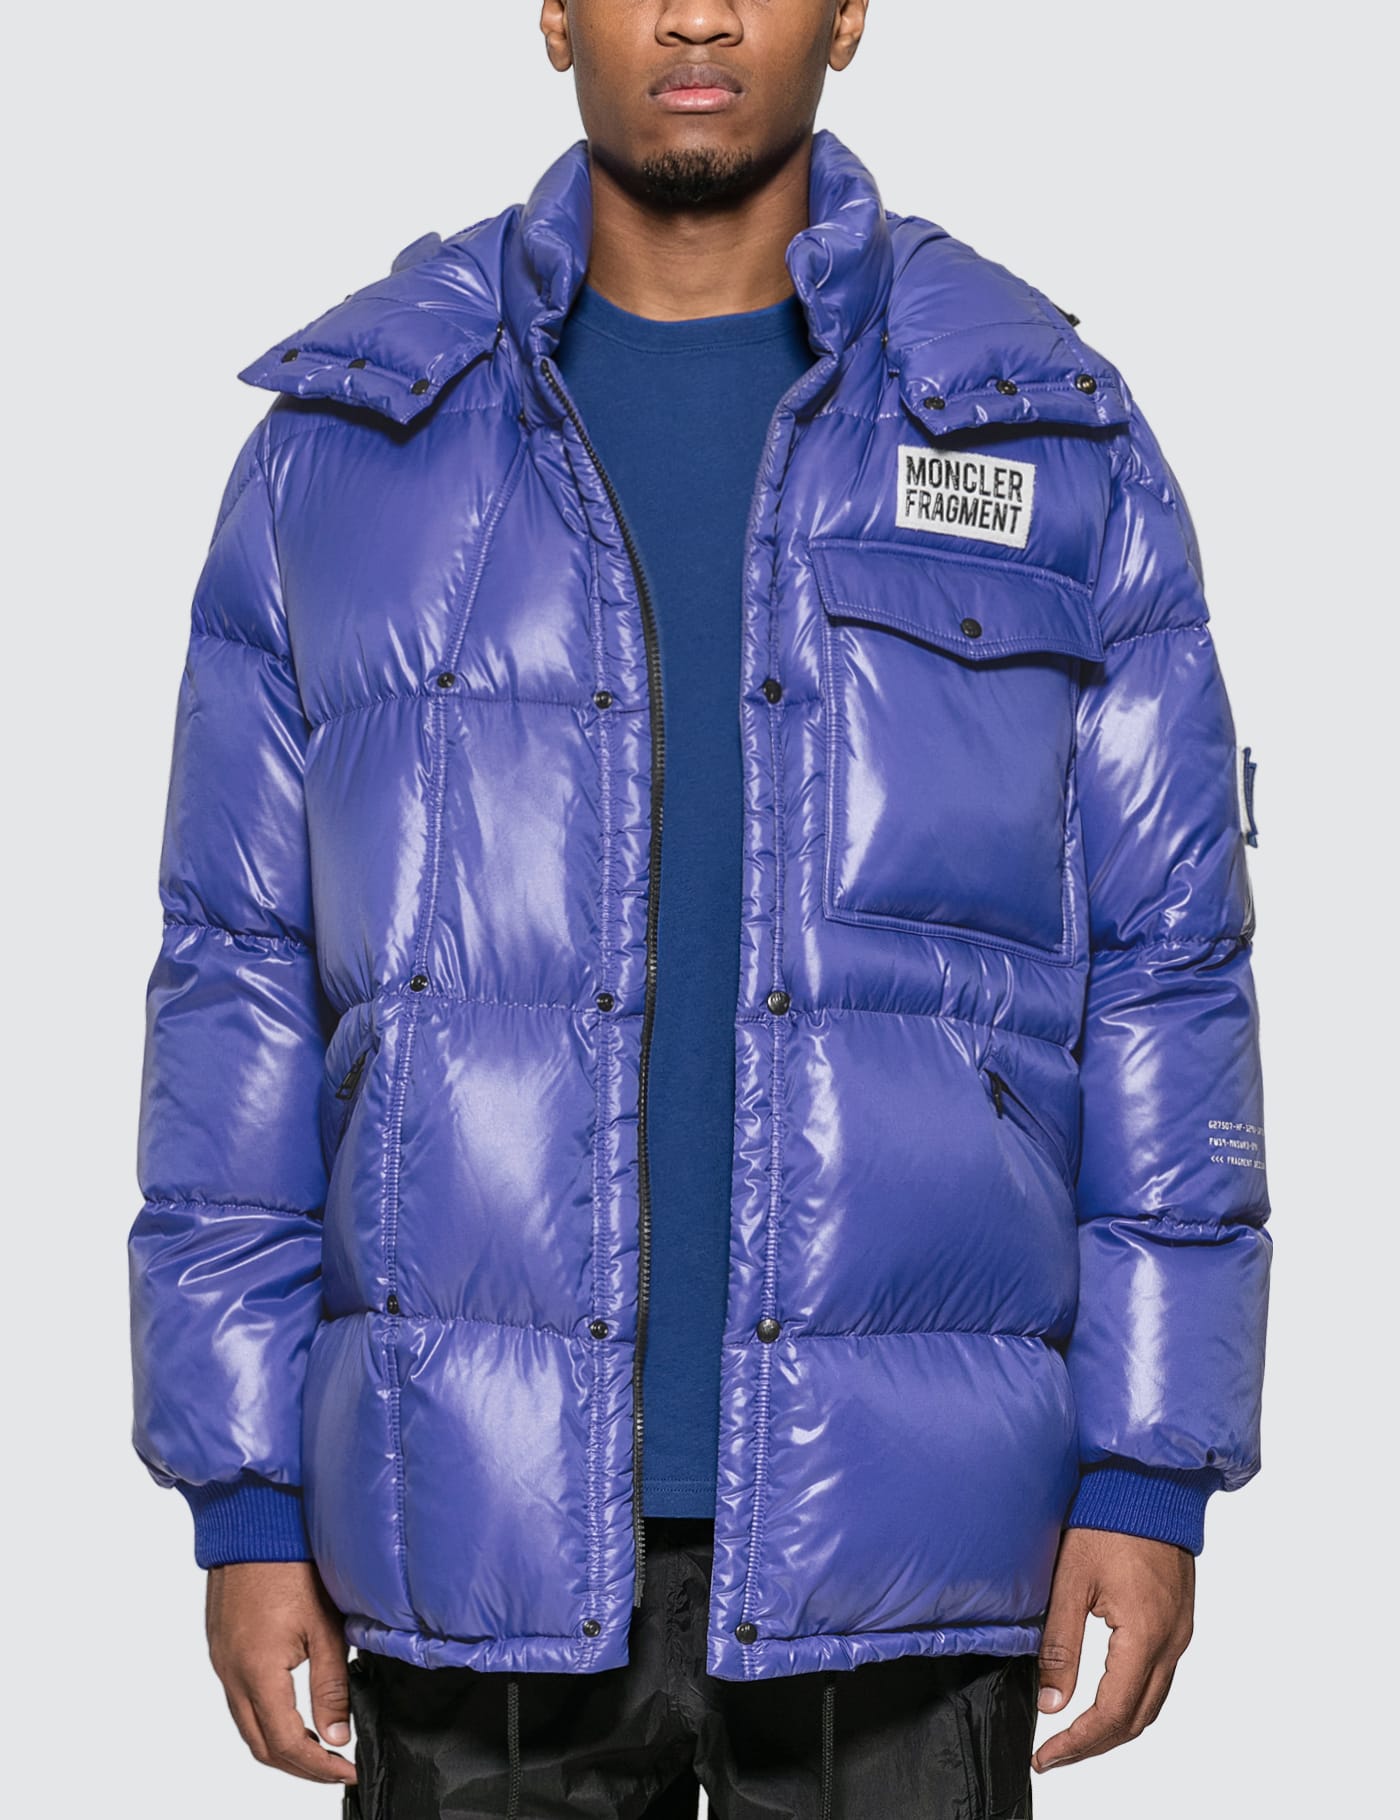 Moncler Fragment Jacket Deals, 60% OFF | www.ilpungolo.org